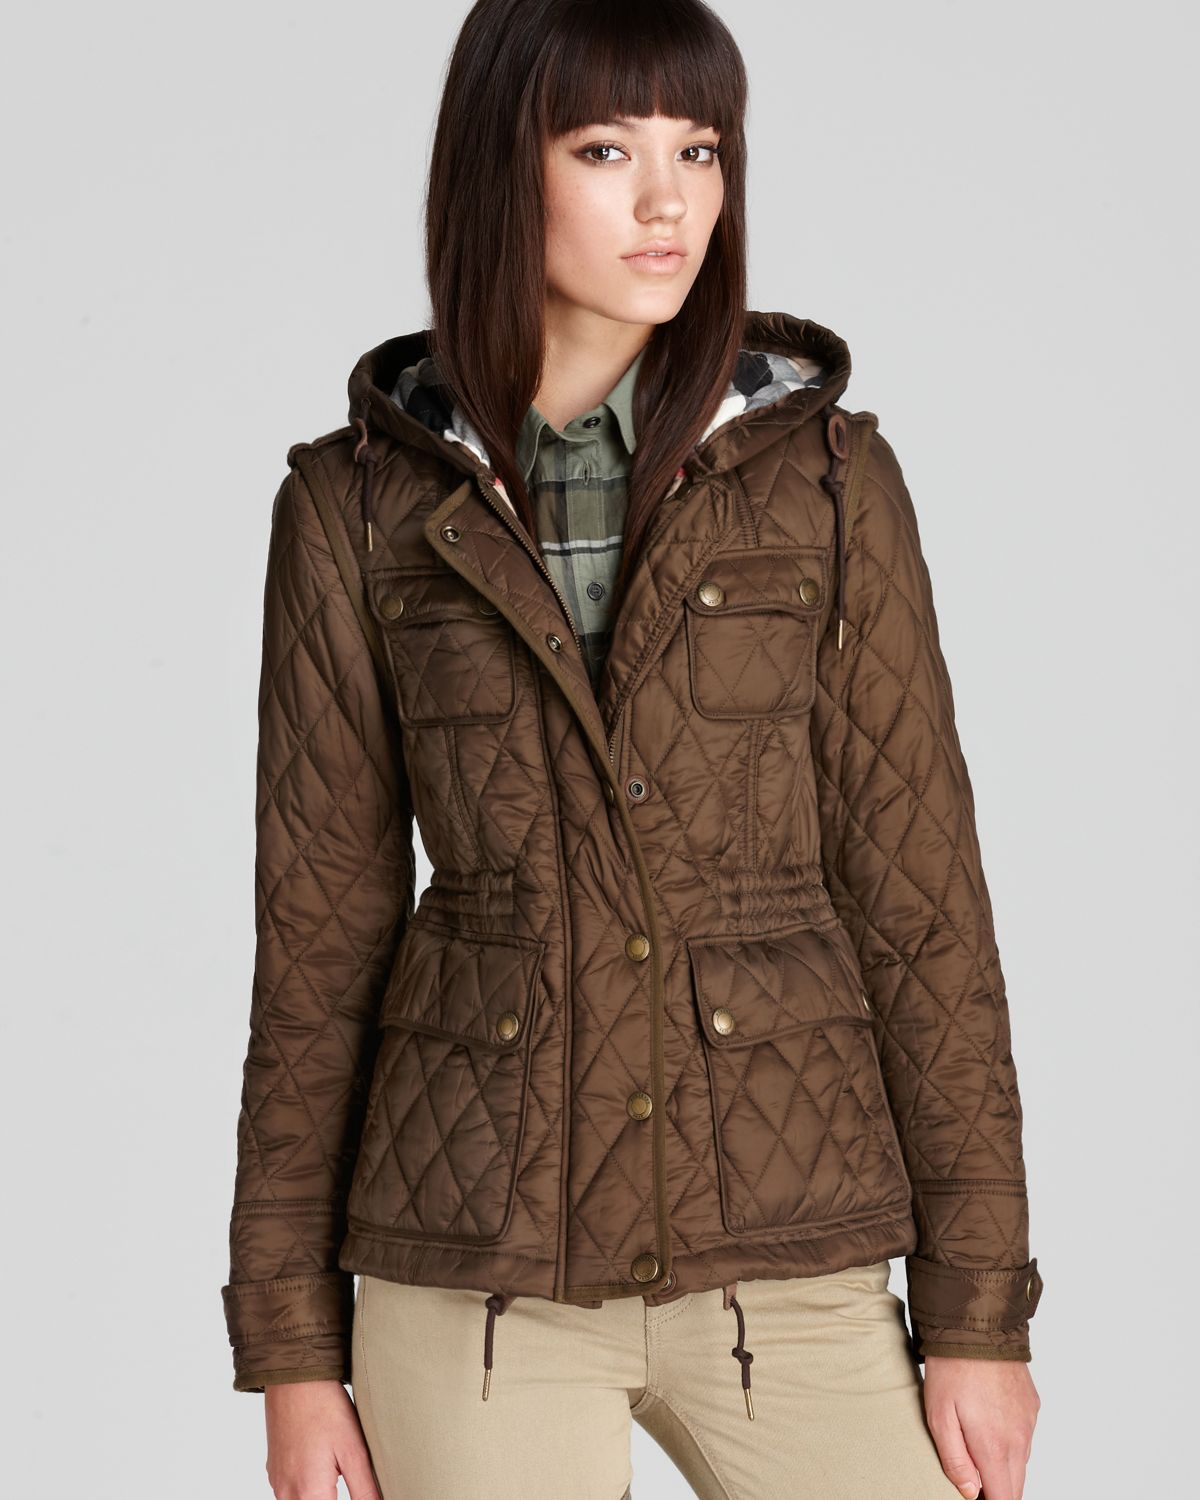 Hooded Quilted Jacket in Khaki Green 